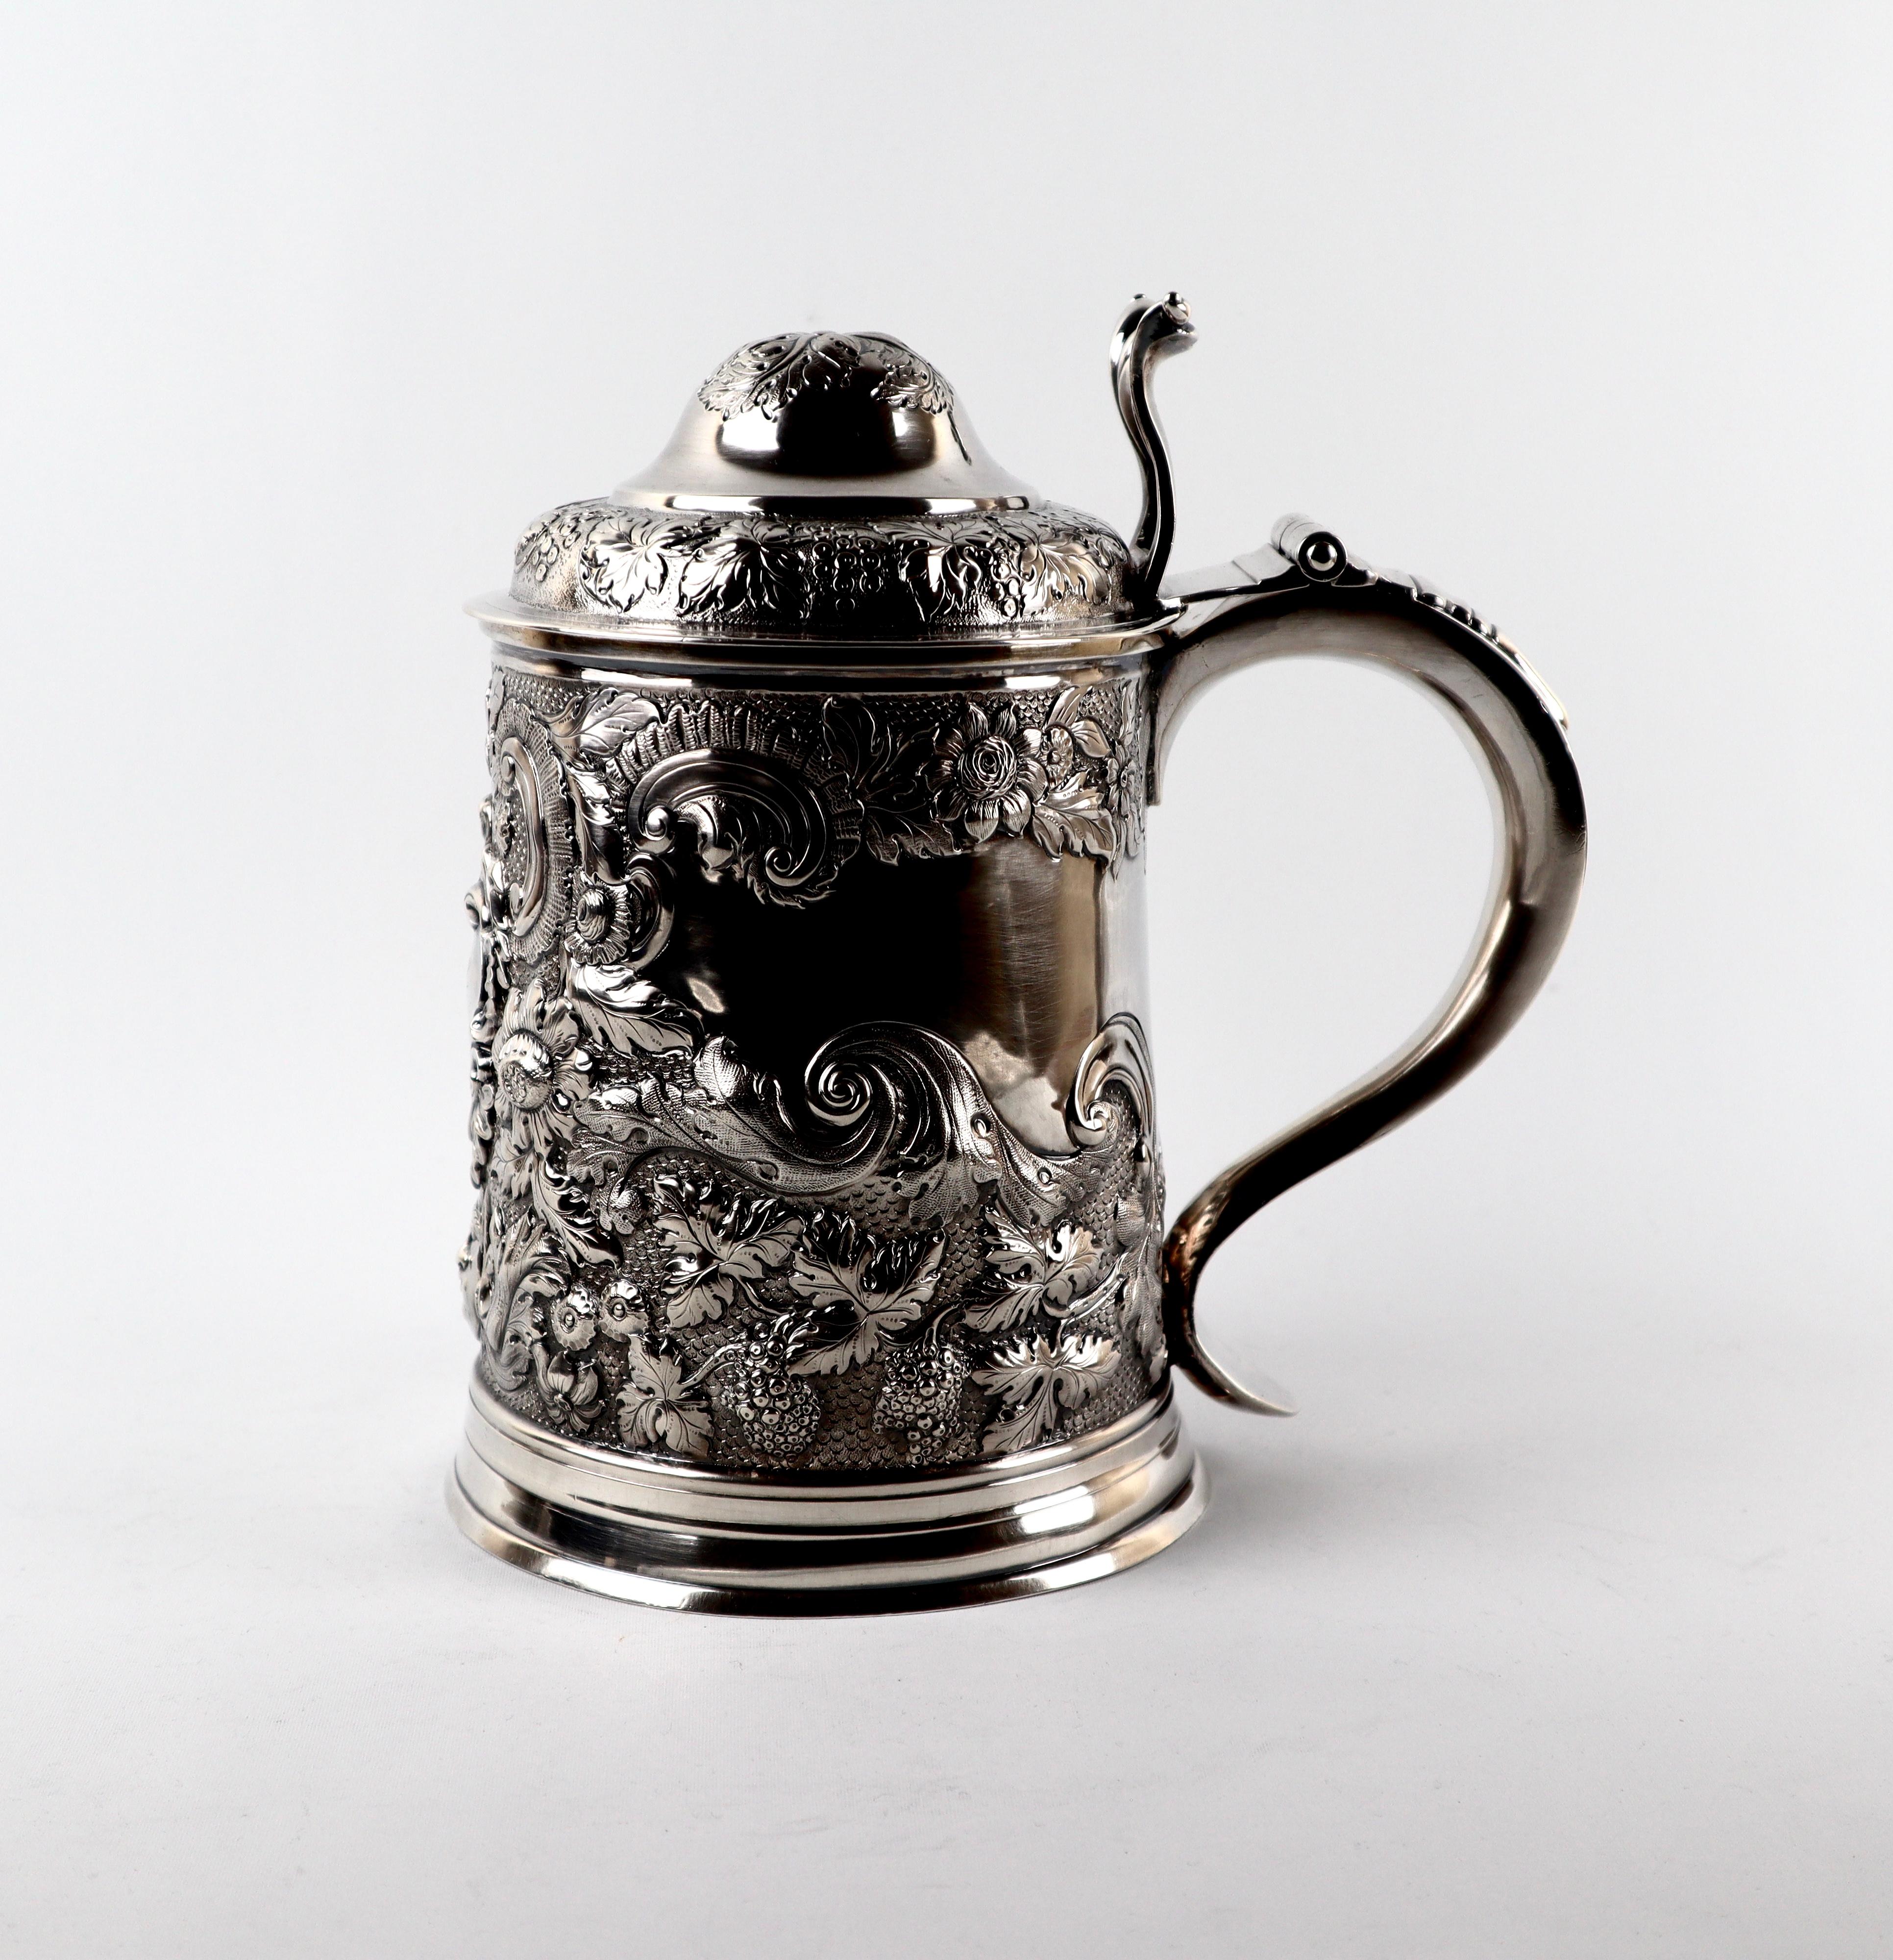 A rare antique Georgian Sterling silver lidded tankard dating dork the 18th century, with an S scroll handle with foliate thumb piece attached to a high domed cover.
Both body and cover are exquisitely embossed with impressive chased scroll leaf